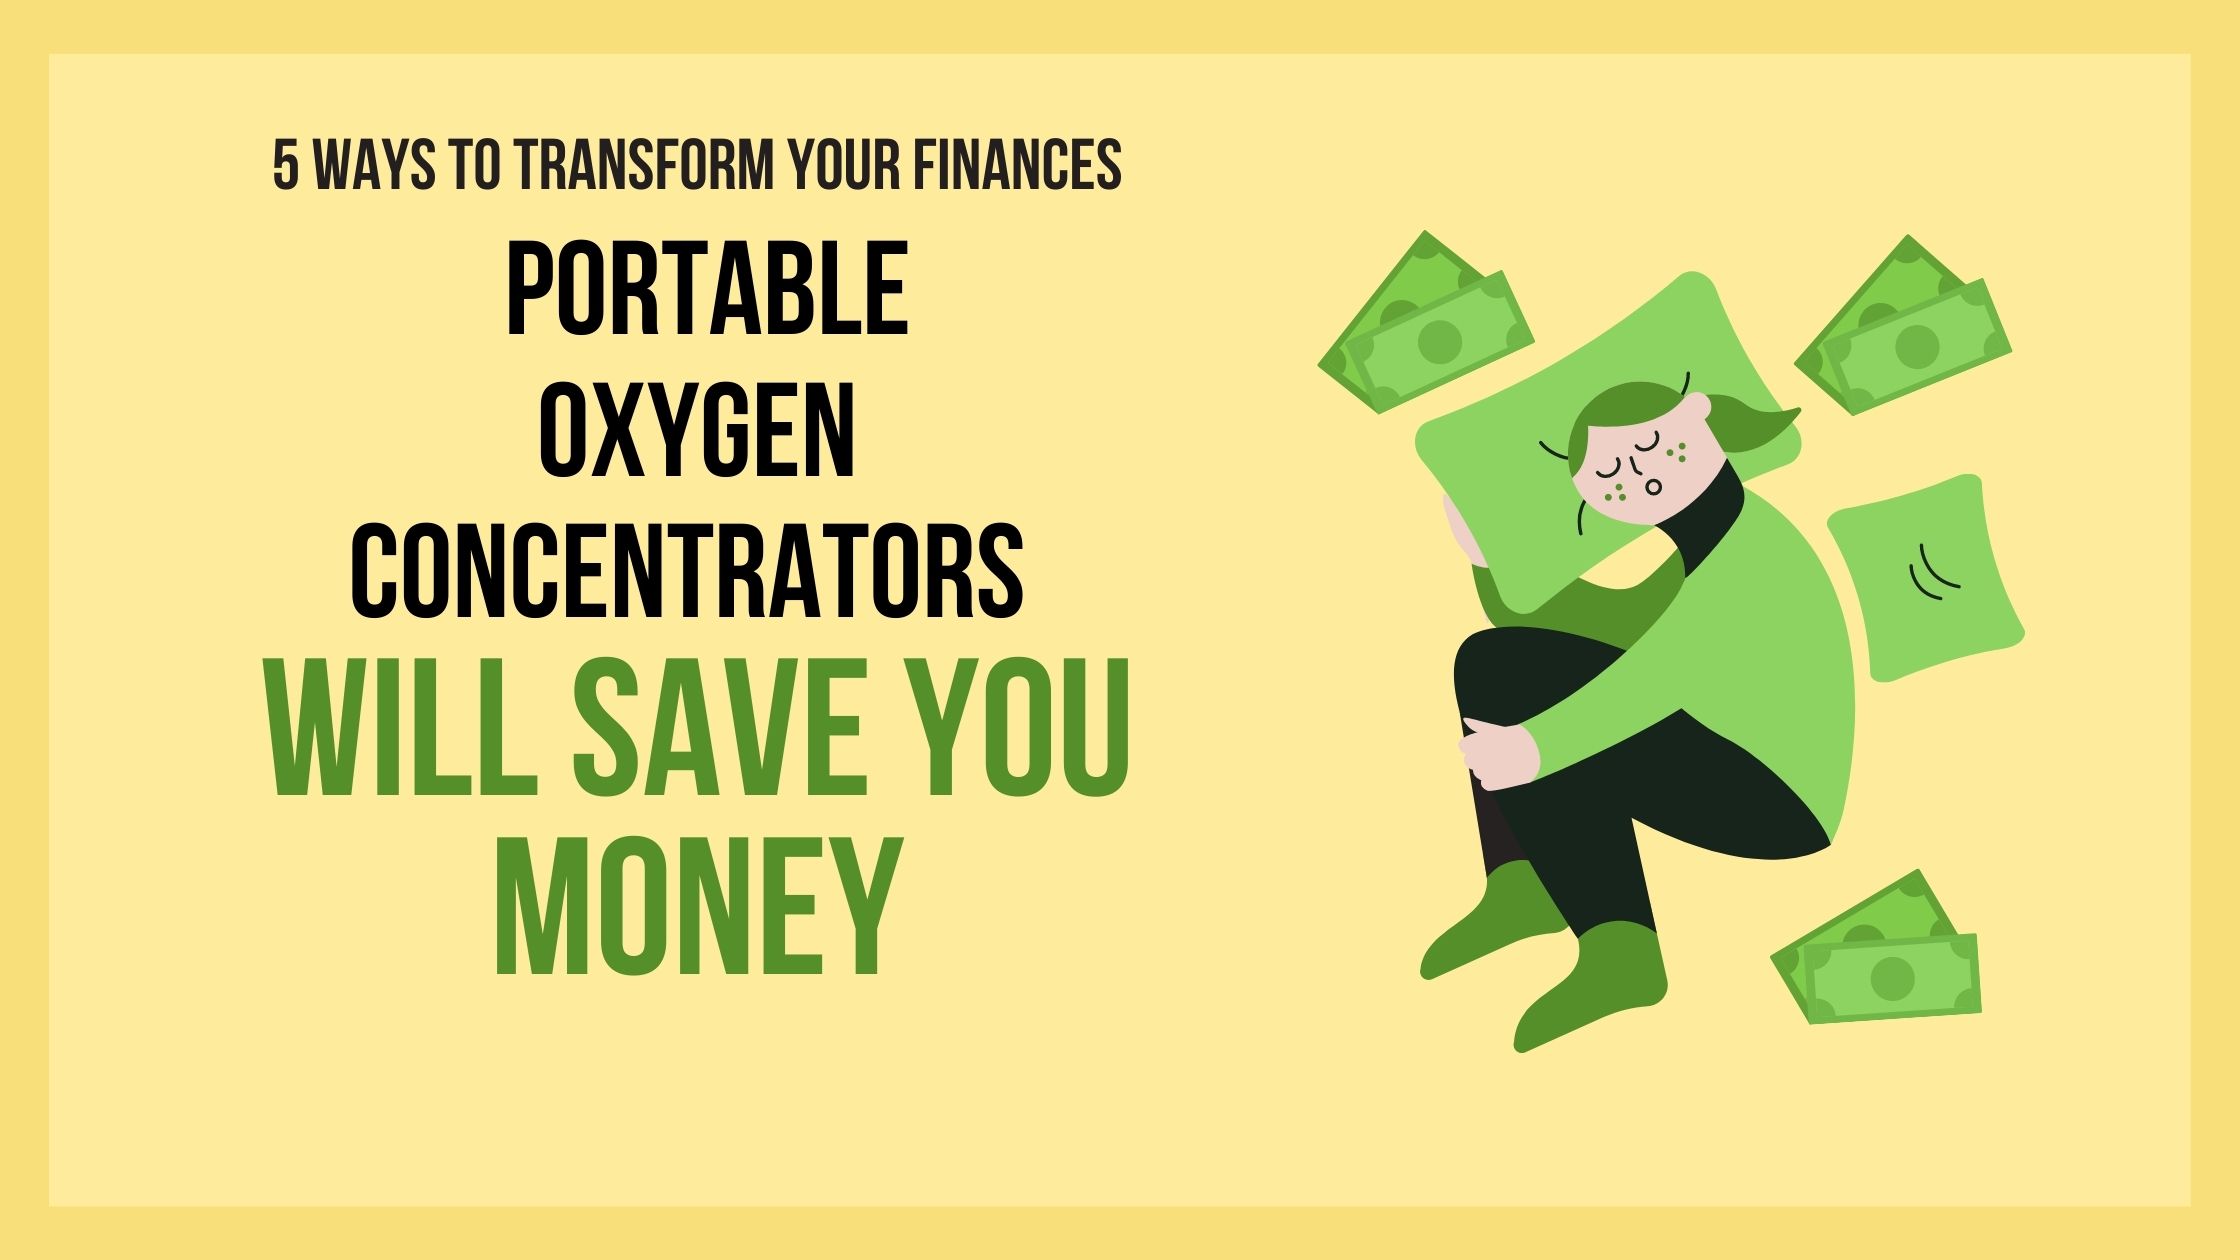 5 Ways Portable Oxygen Concentrators Will Save You Money